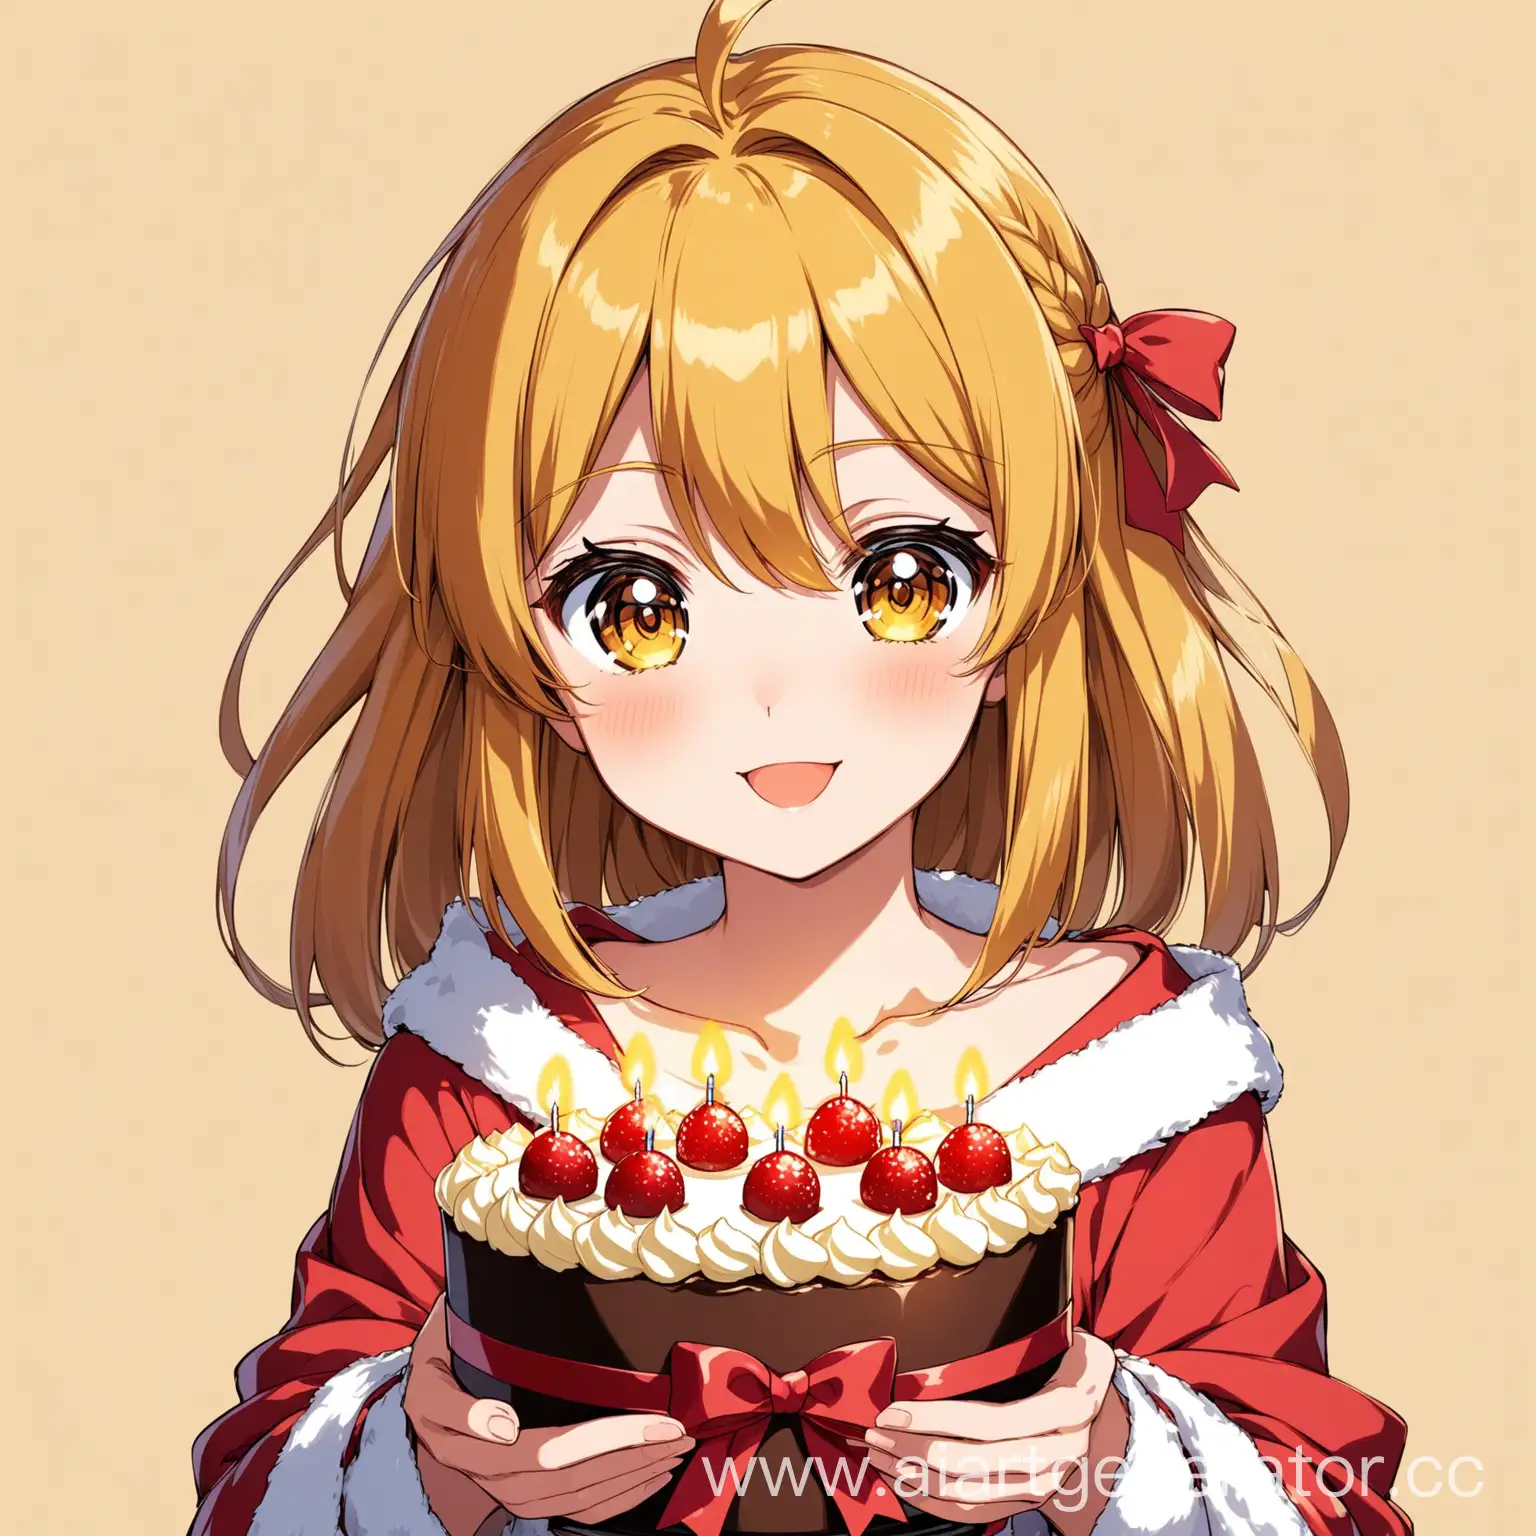 Anime-Character-Celebrating-Birthday-in-HighQuality-Art